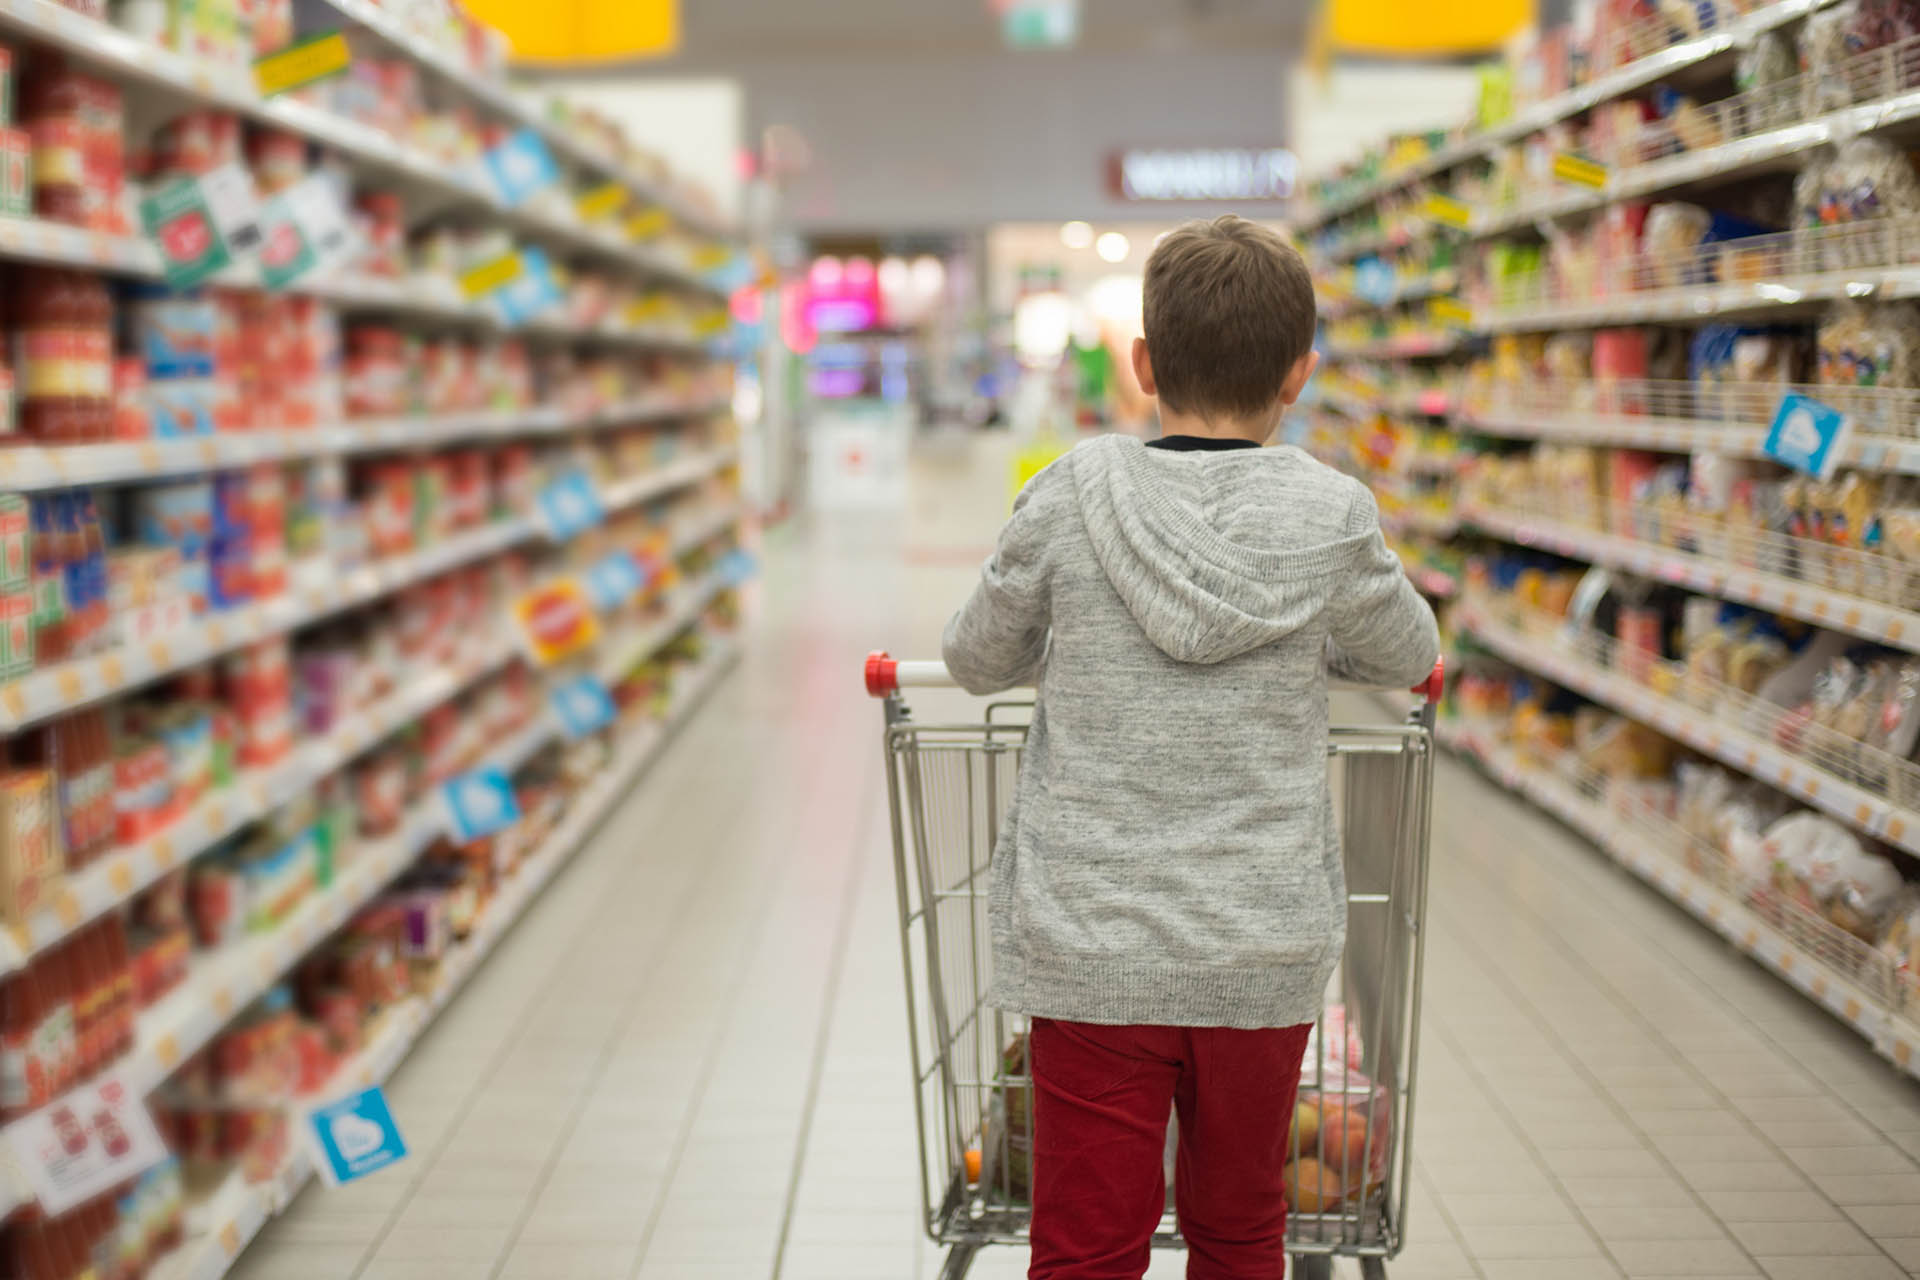 Boy in supermarket aisle with trolley